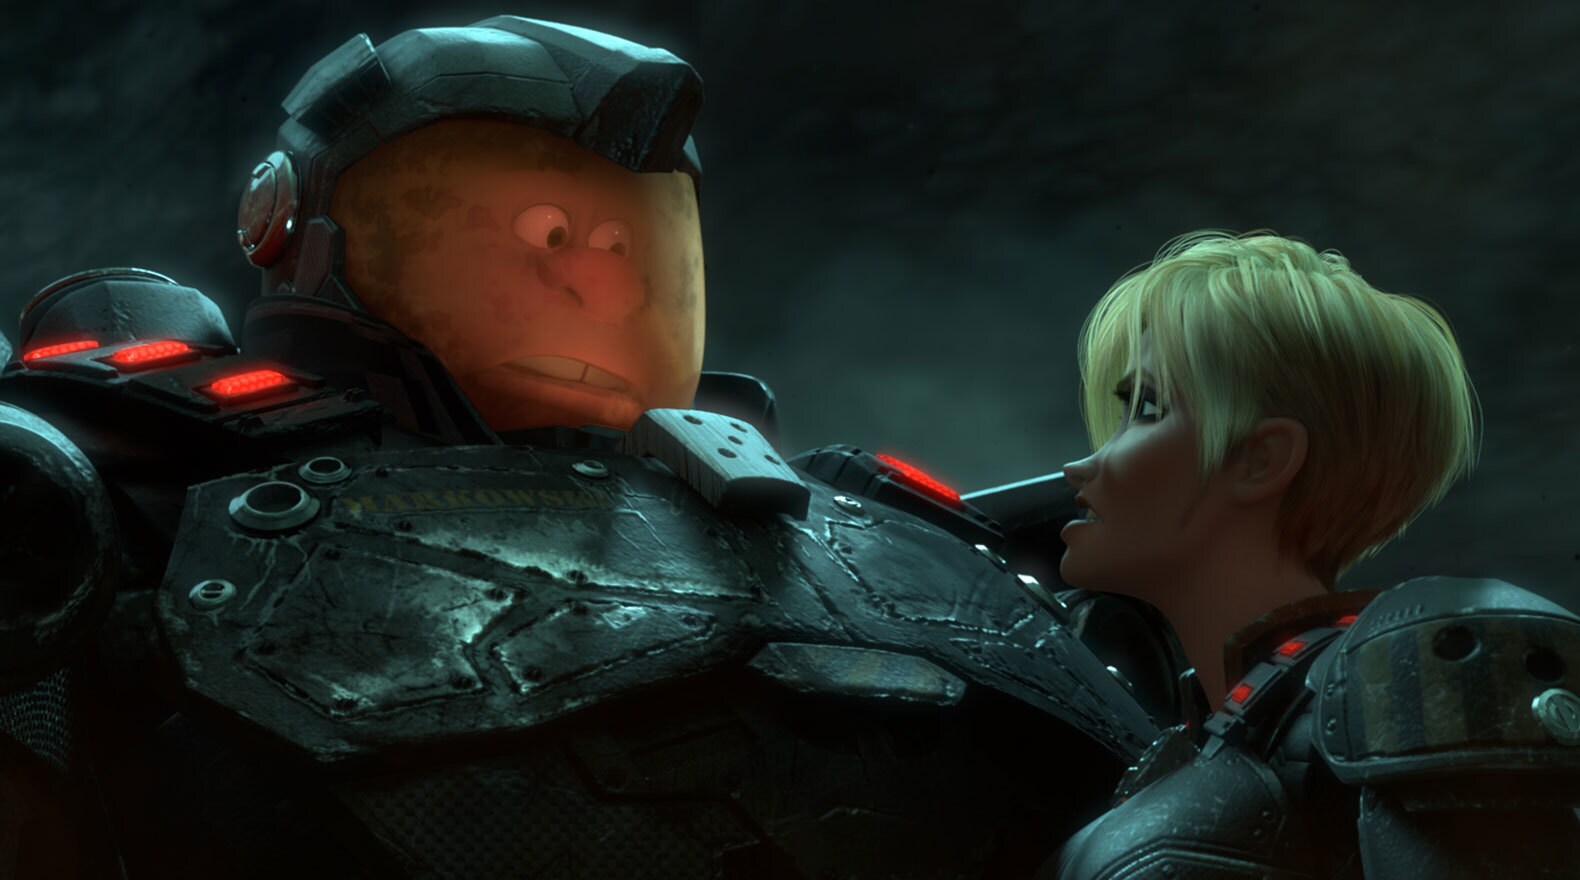 Calhoun, played by Jane Lynch, telling Ralph, played by John C. Riley, how things work in the game Hero's Duty in "Wreck-It Ralph"